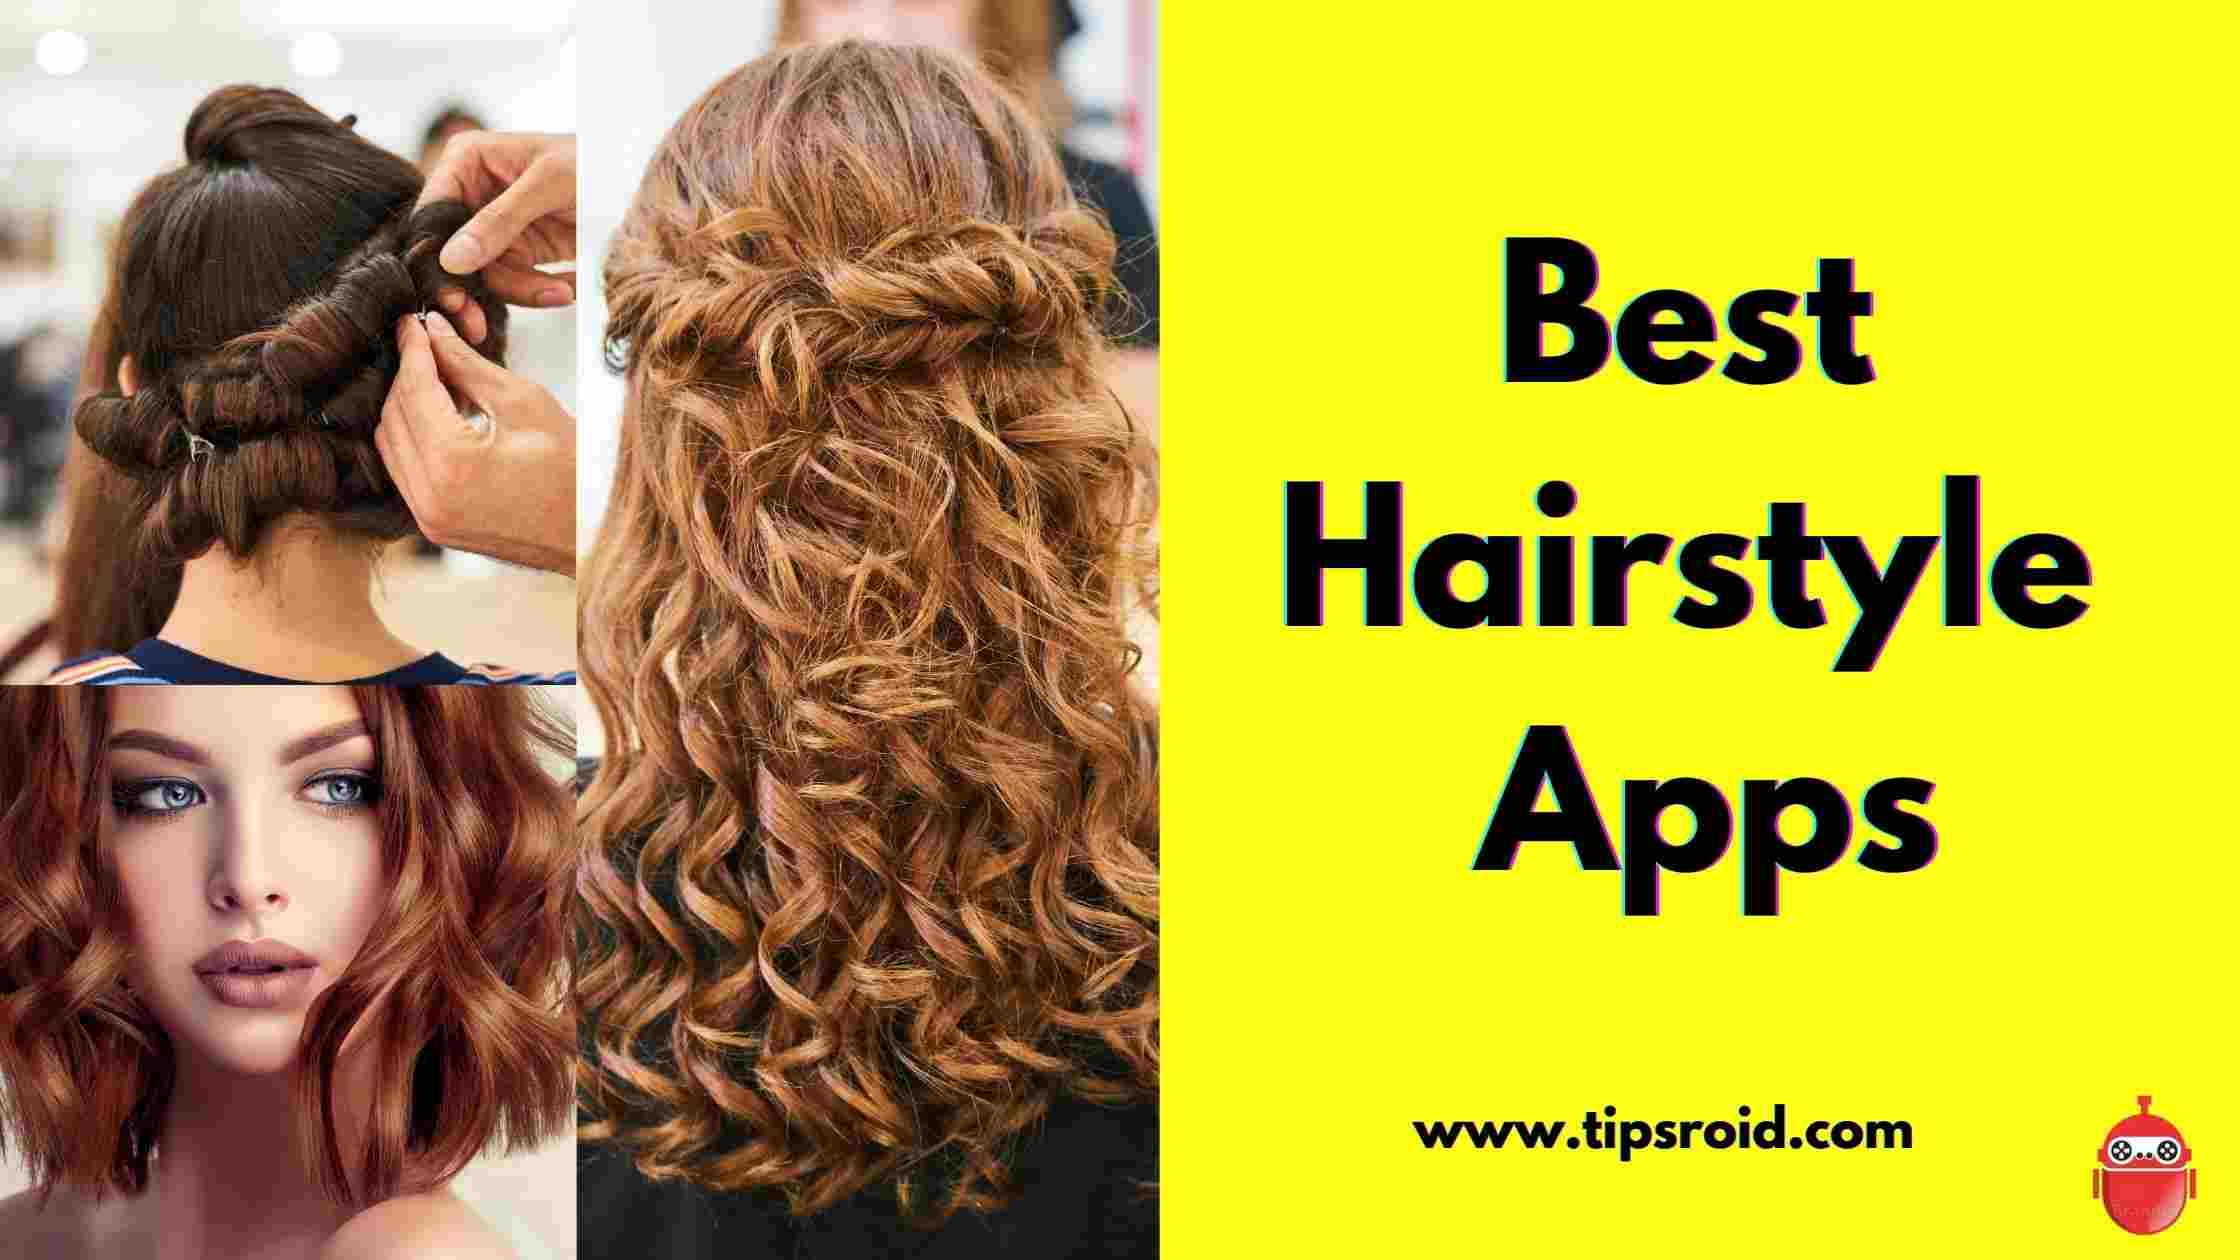 10 Best Hairstyle Apps For Android and iPhone